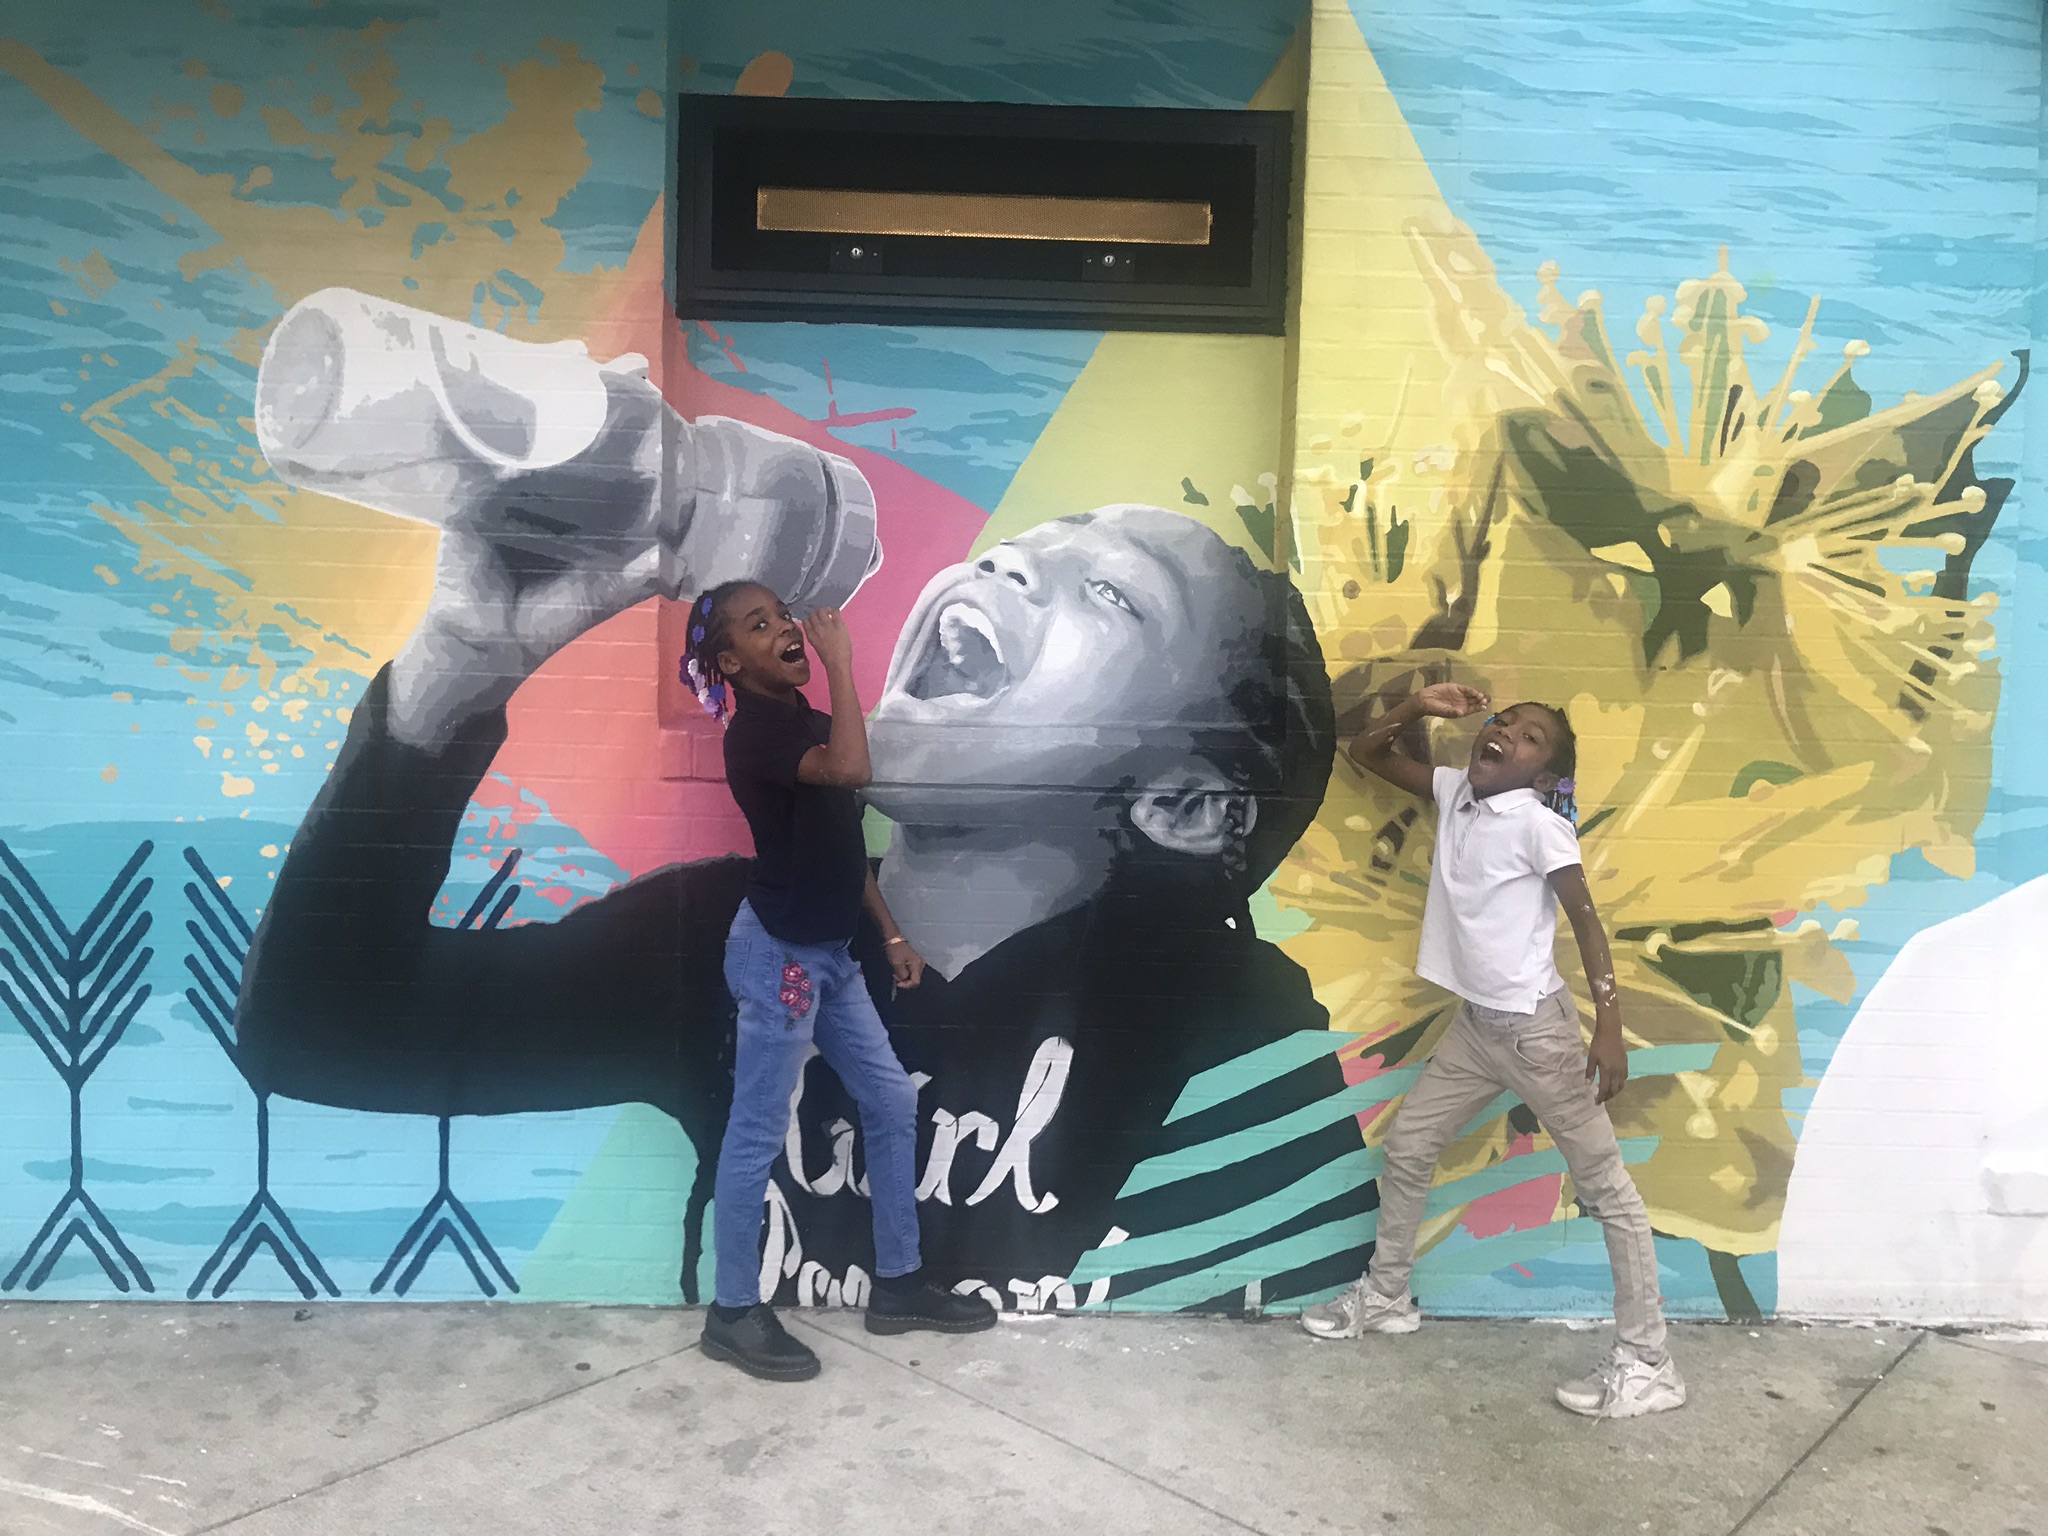 The mural show a young girl with dark skin and braids drinking from a reusable water bottle, painted in shades of grey with colorful abstract designs on a light blue background that looks like water. The model and another young girl stand in front of the wall mimicing her pose